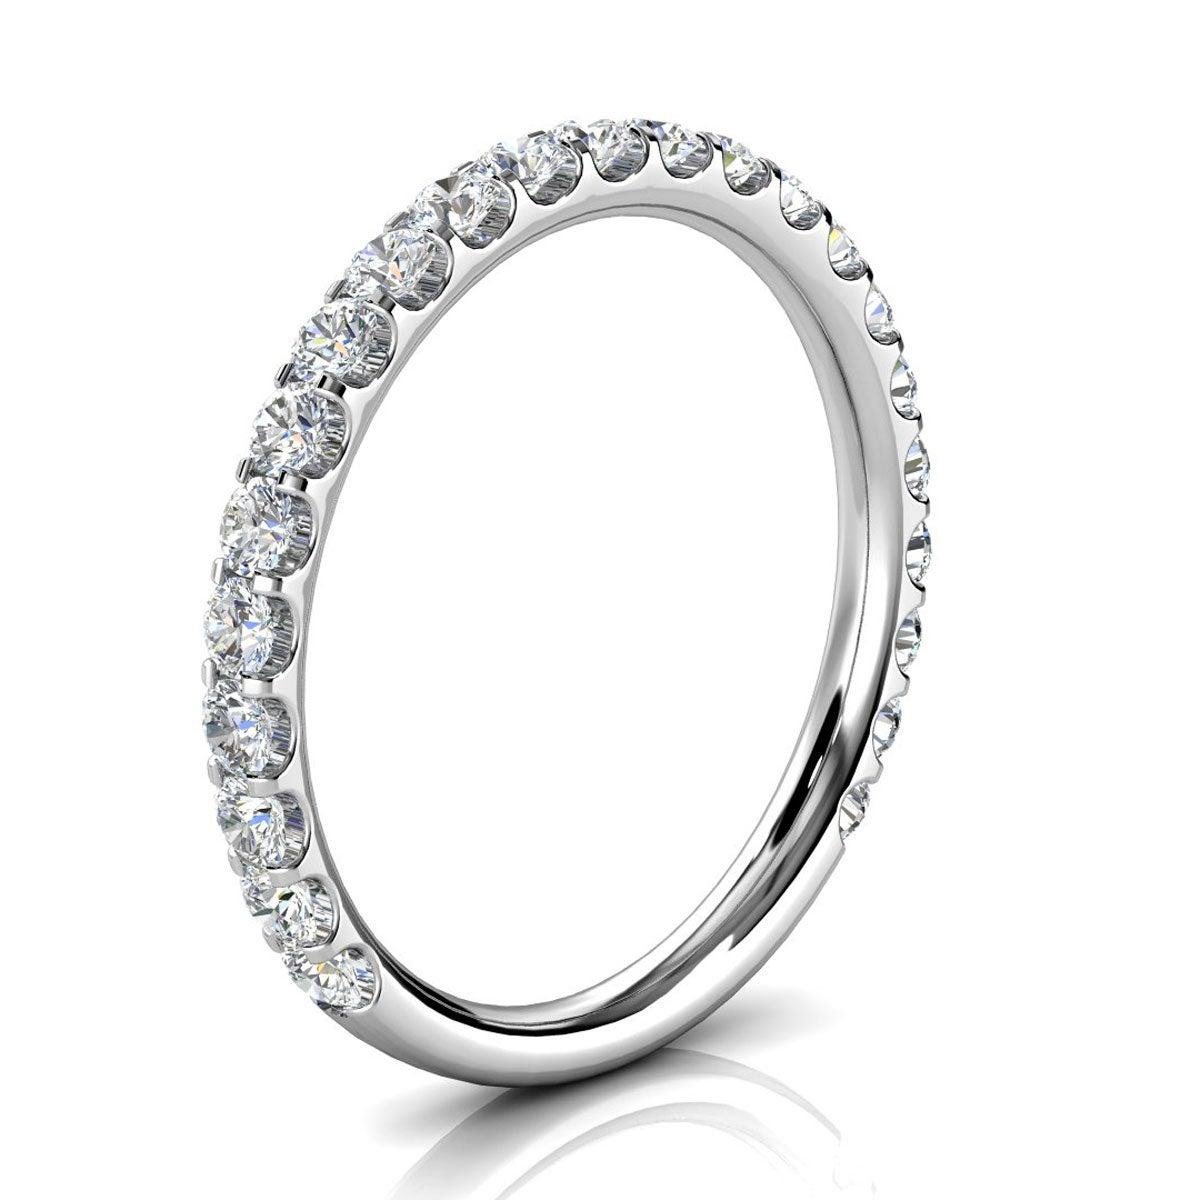 For Sale:  Platinum Micro-Prong Diamond Ring '1/2 Ct. Tw' 2